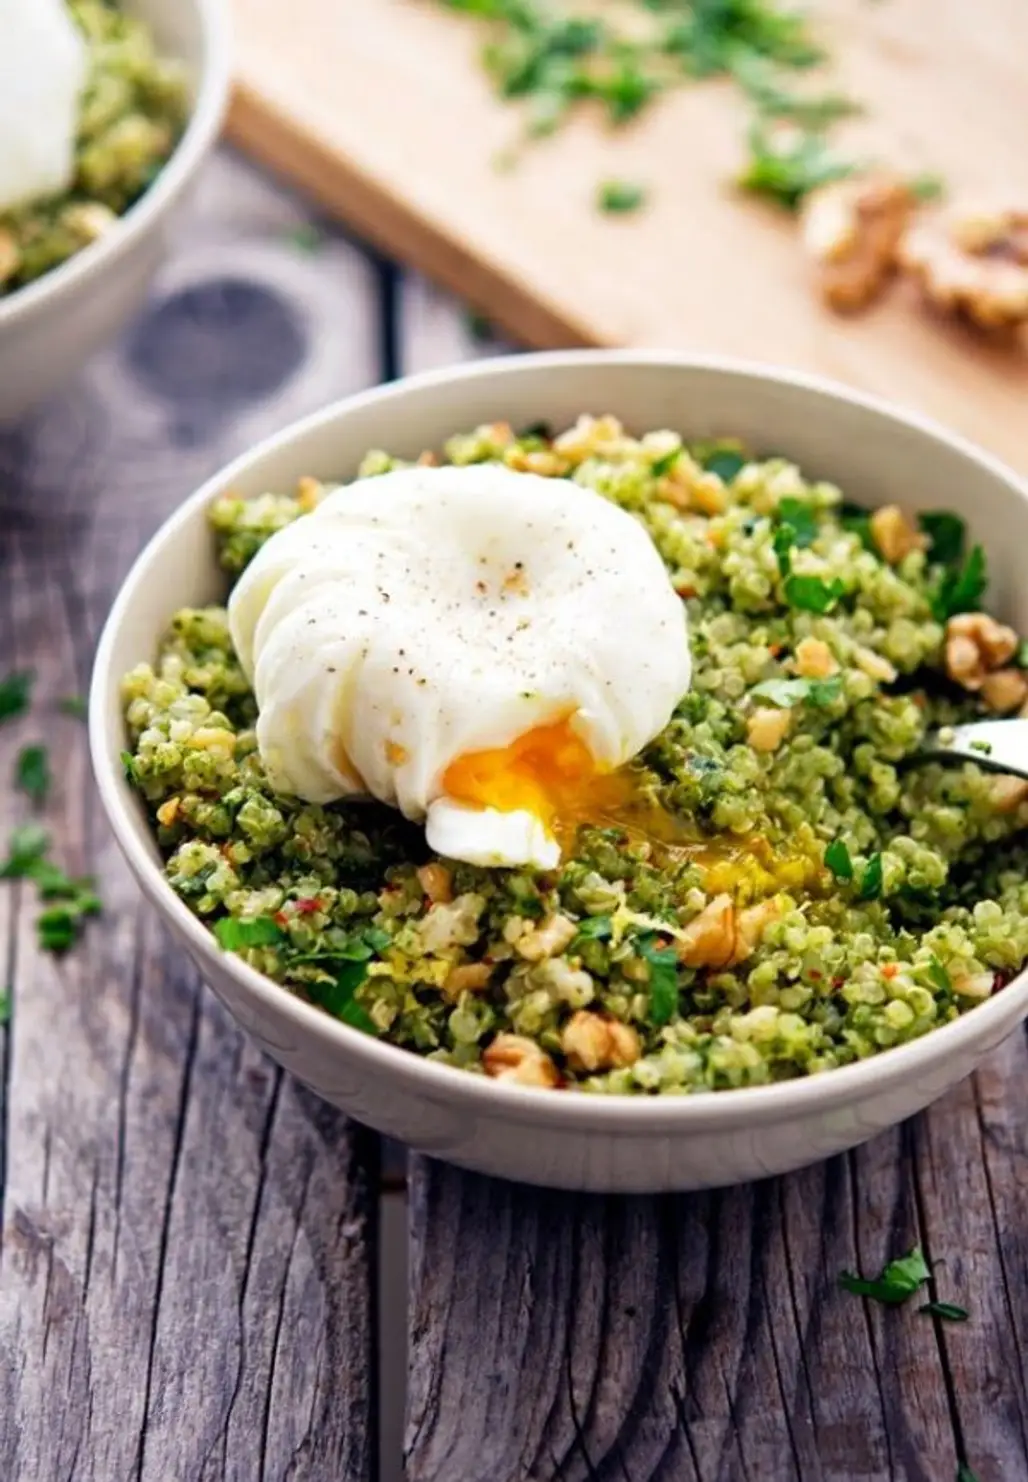 You Knew Quinoa Would Make the List, Didn’t You?